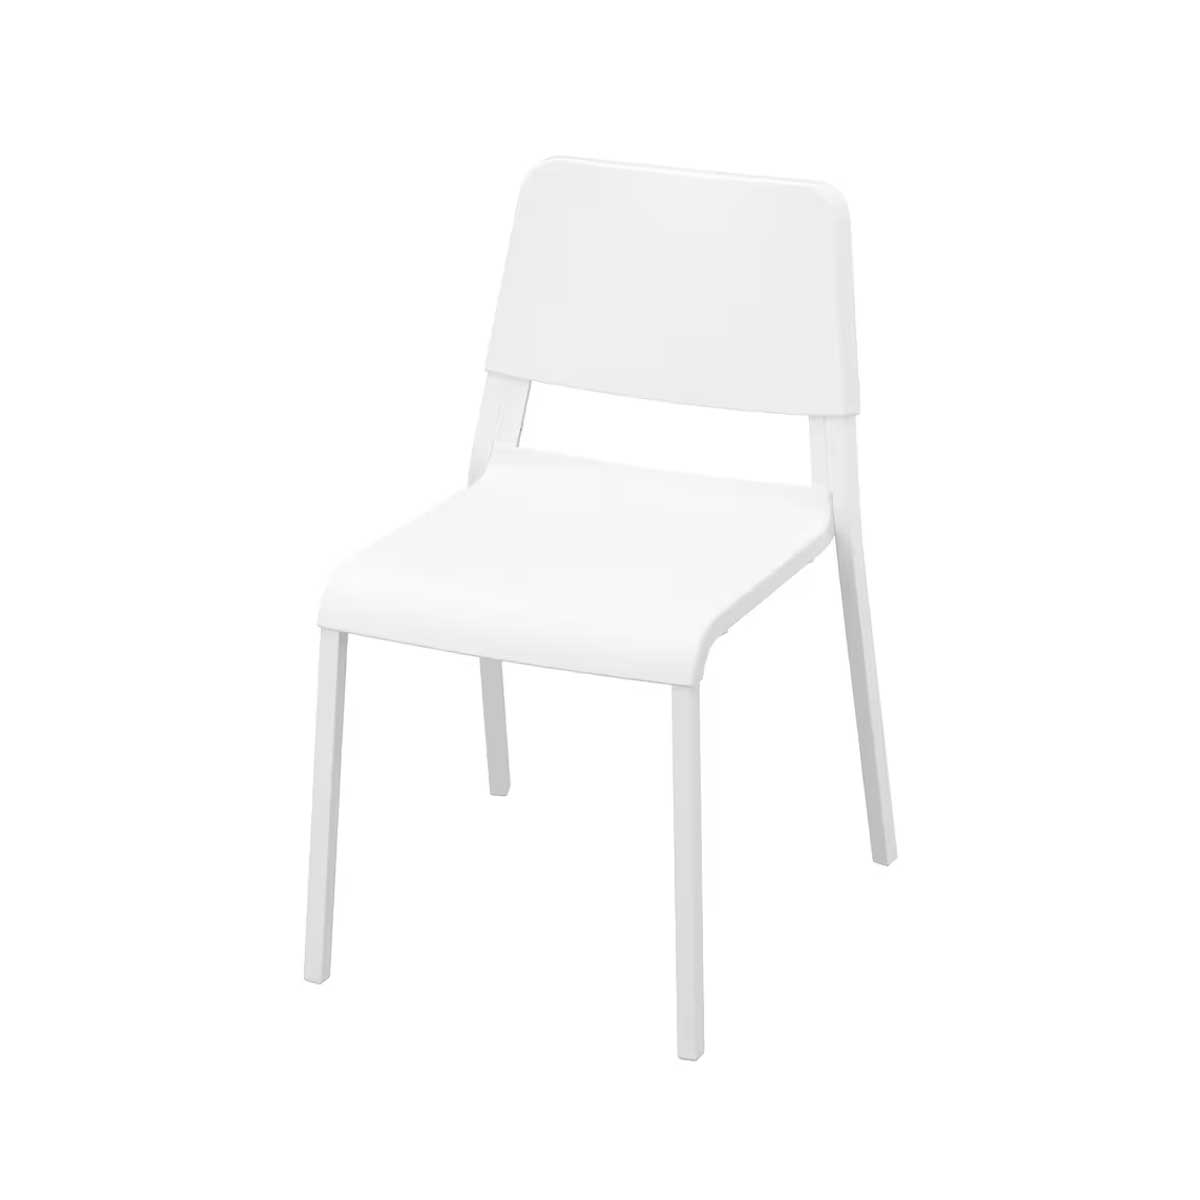 Teodores chair white